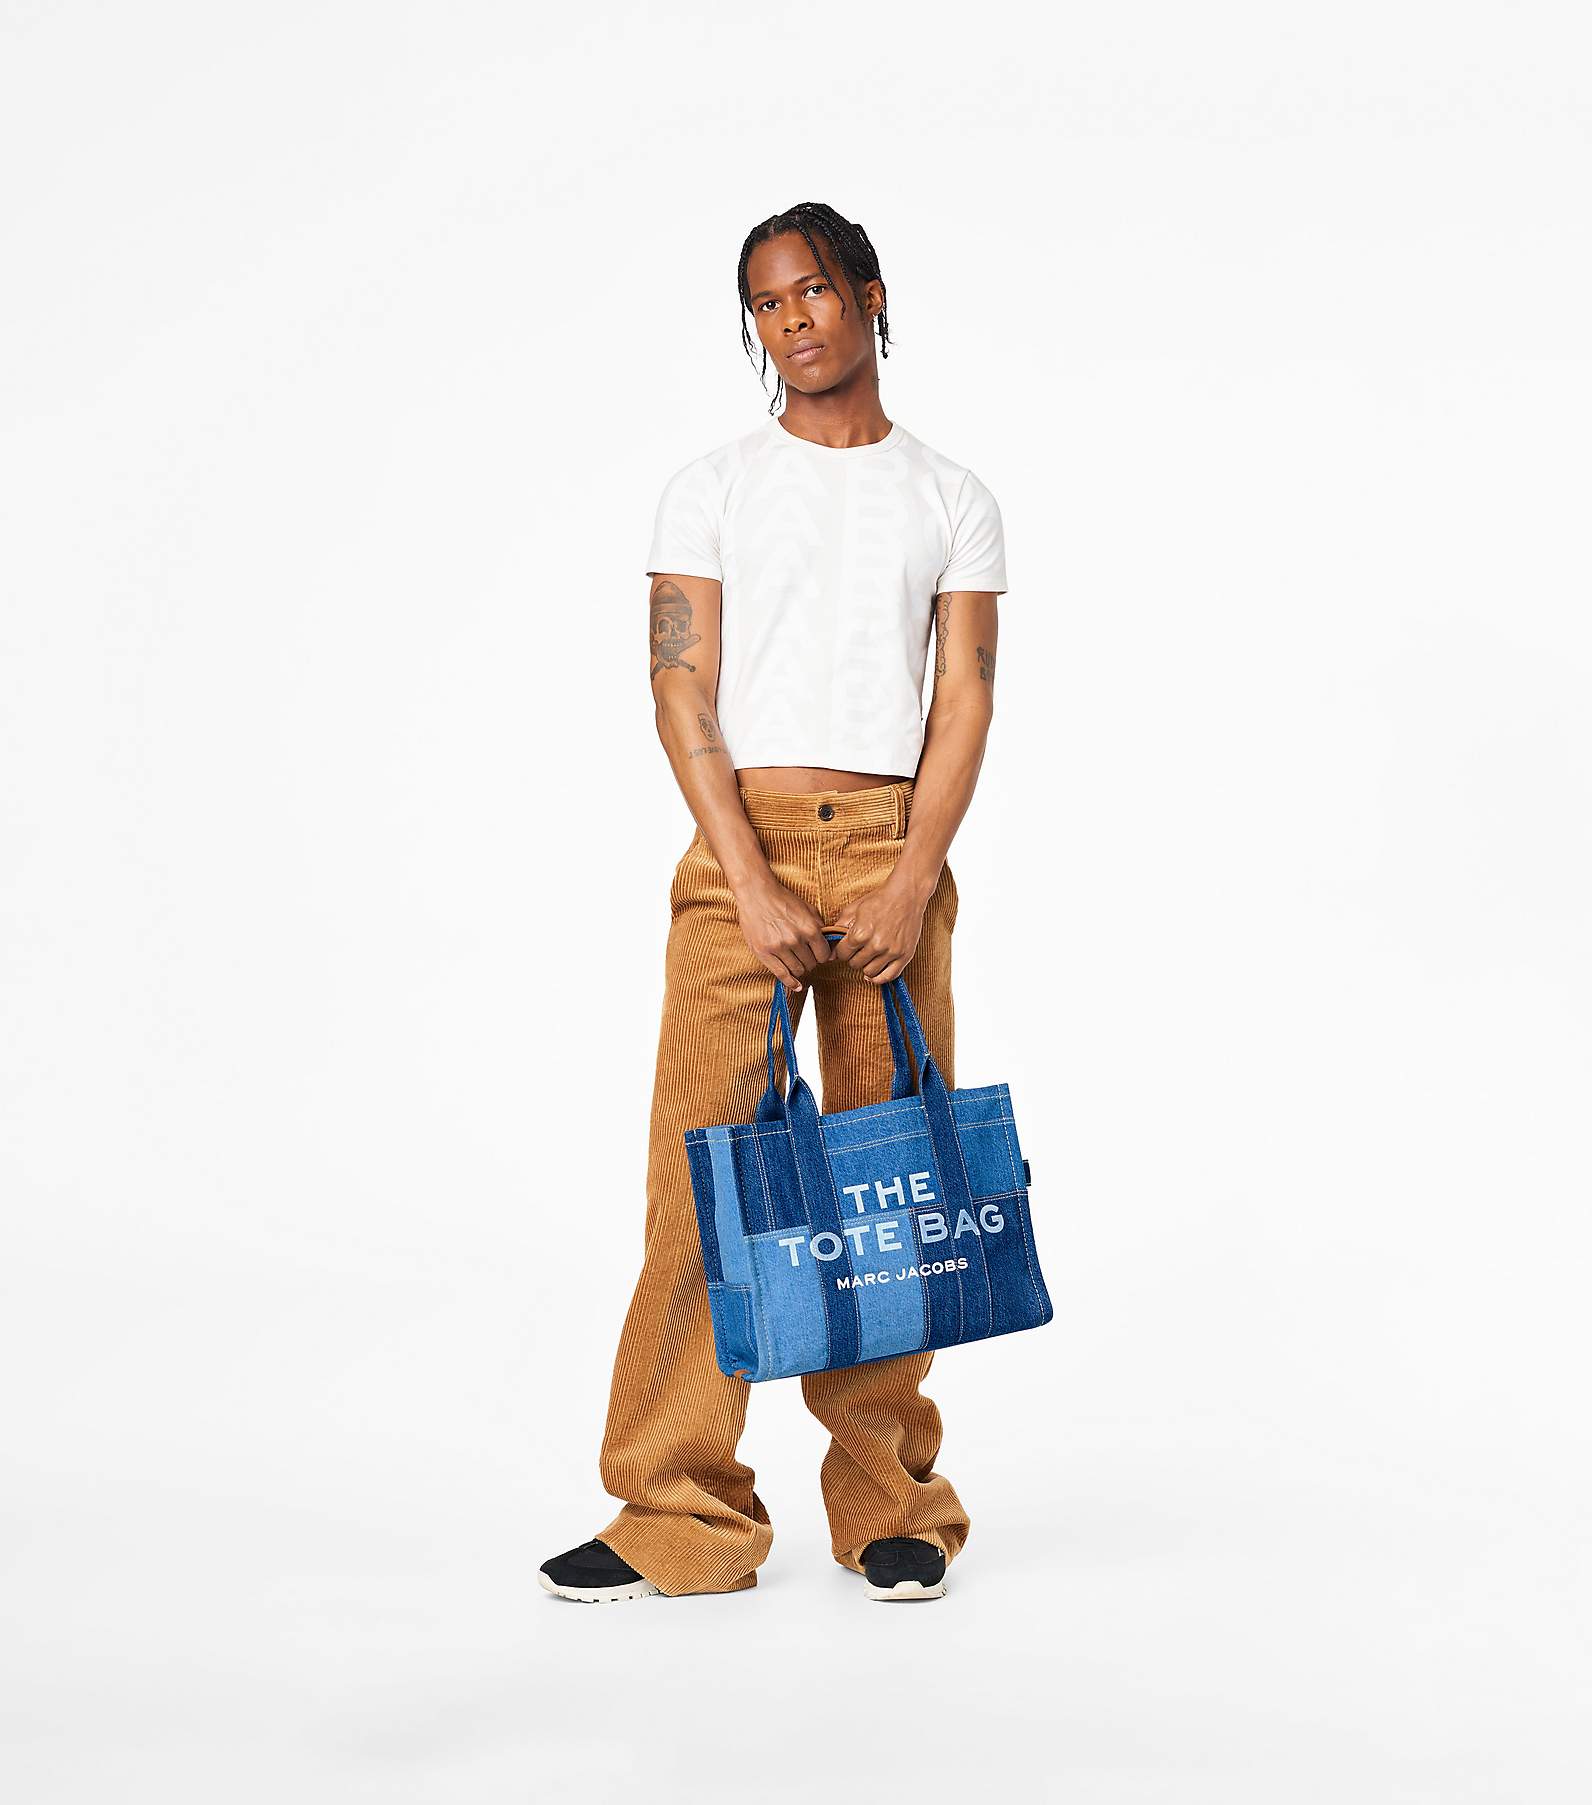 Marc Jacobs New Logo Denim Tote in Blue